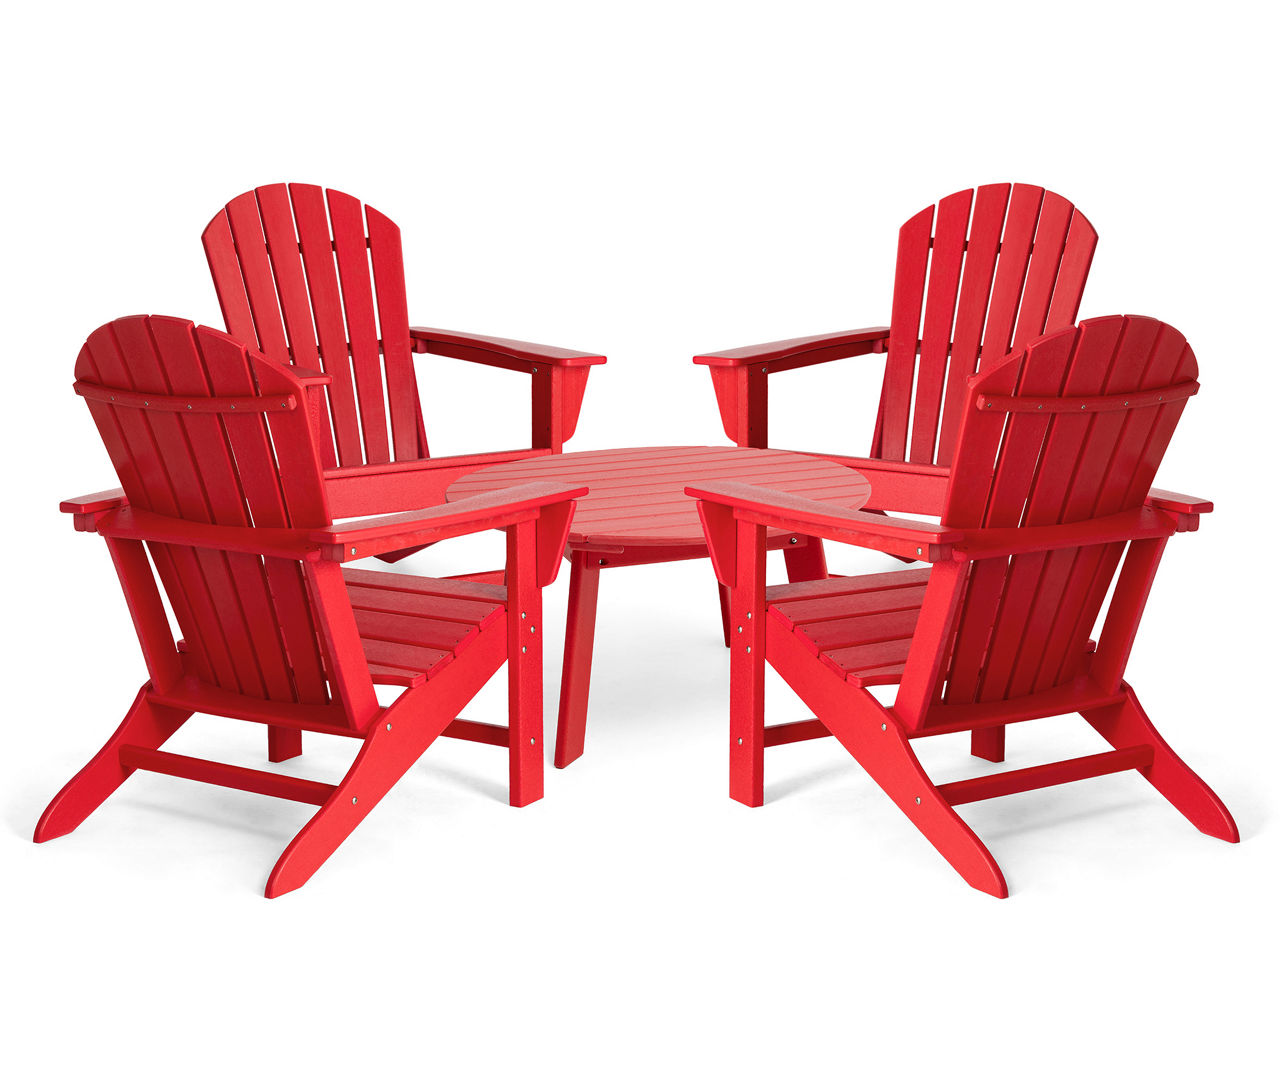 5-Piece Outdoor Patio Red HDPE Adirondack Chair and Coffee Table Set1pc 32"D Coffee Table4pcs Adirondack Chairs (KD)